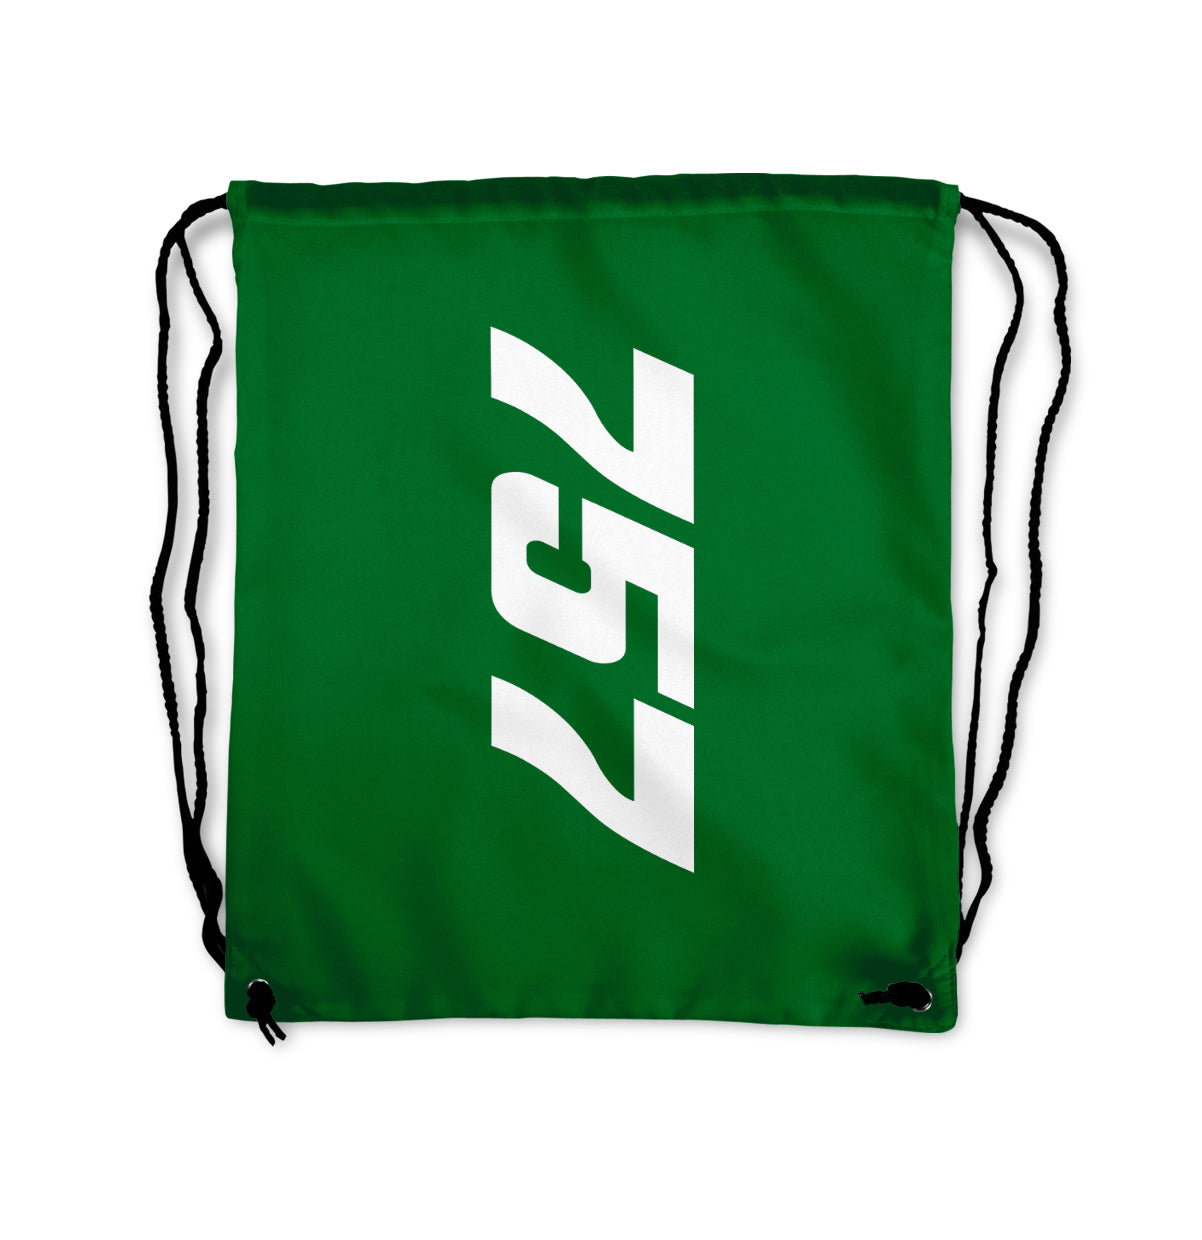 Boeing 757 Text Designed Drawstring Bags